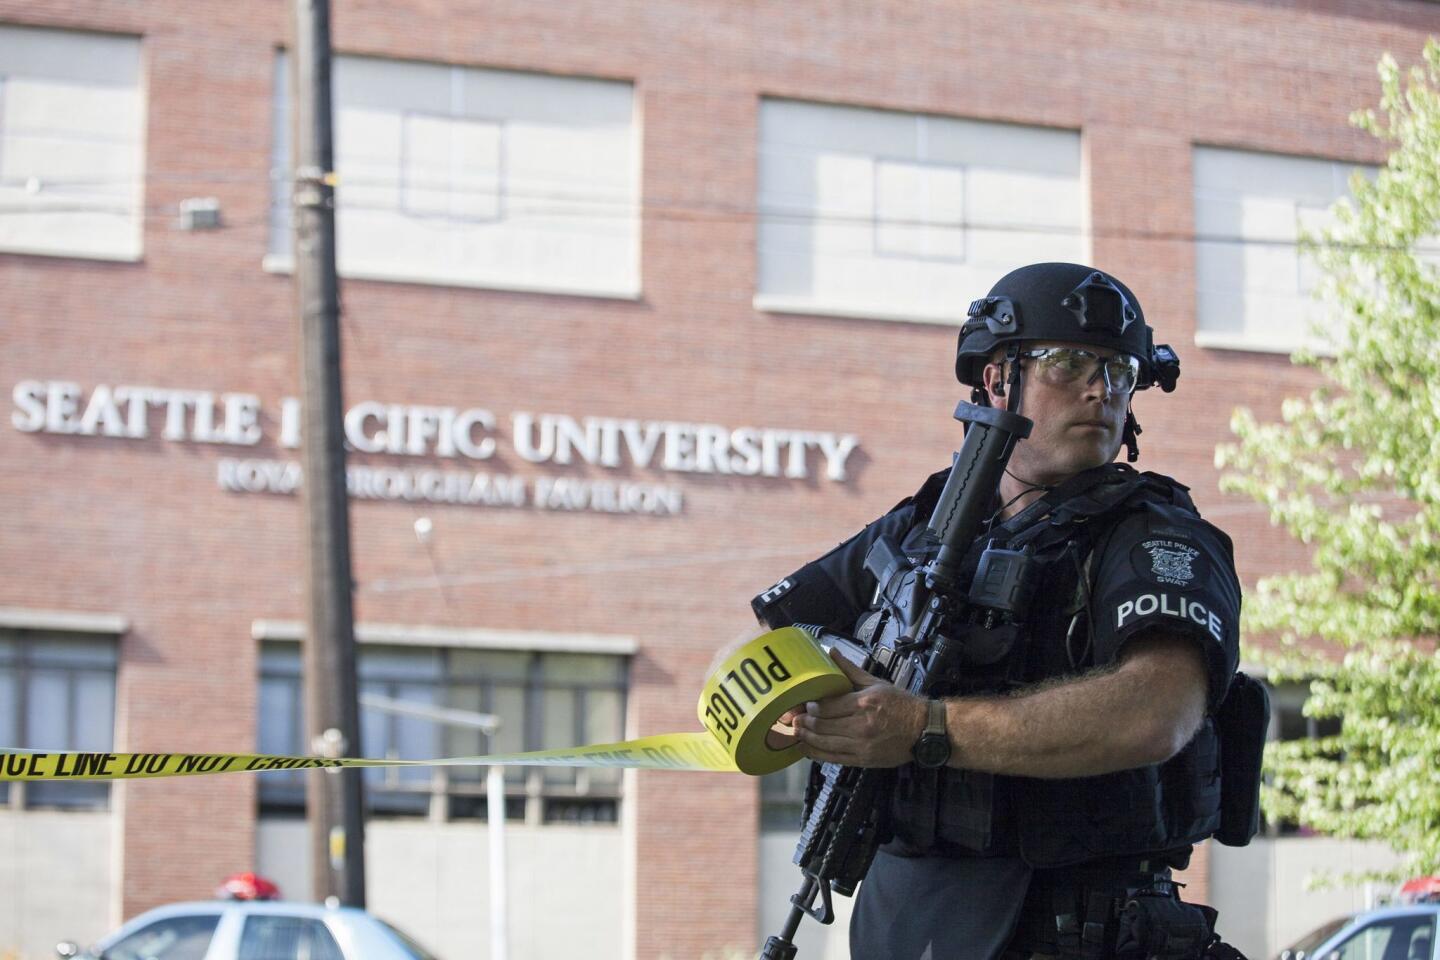 A policeman secures the scene at Seattle Pacific University after the campus was evacuated due to a shooting that left 1 dead and several wounded.